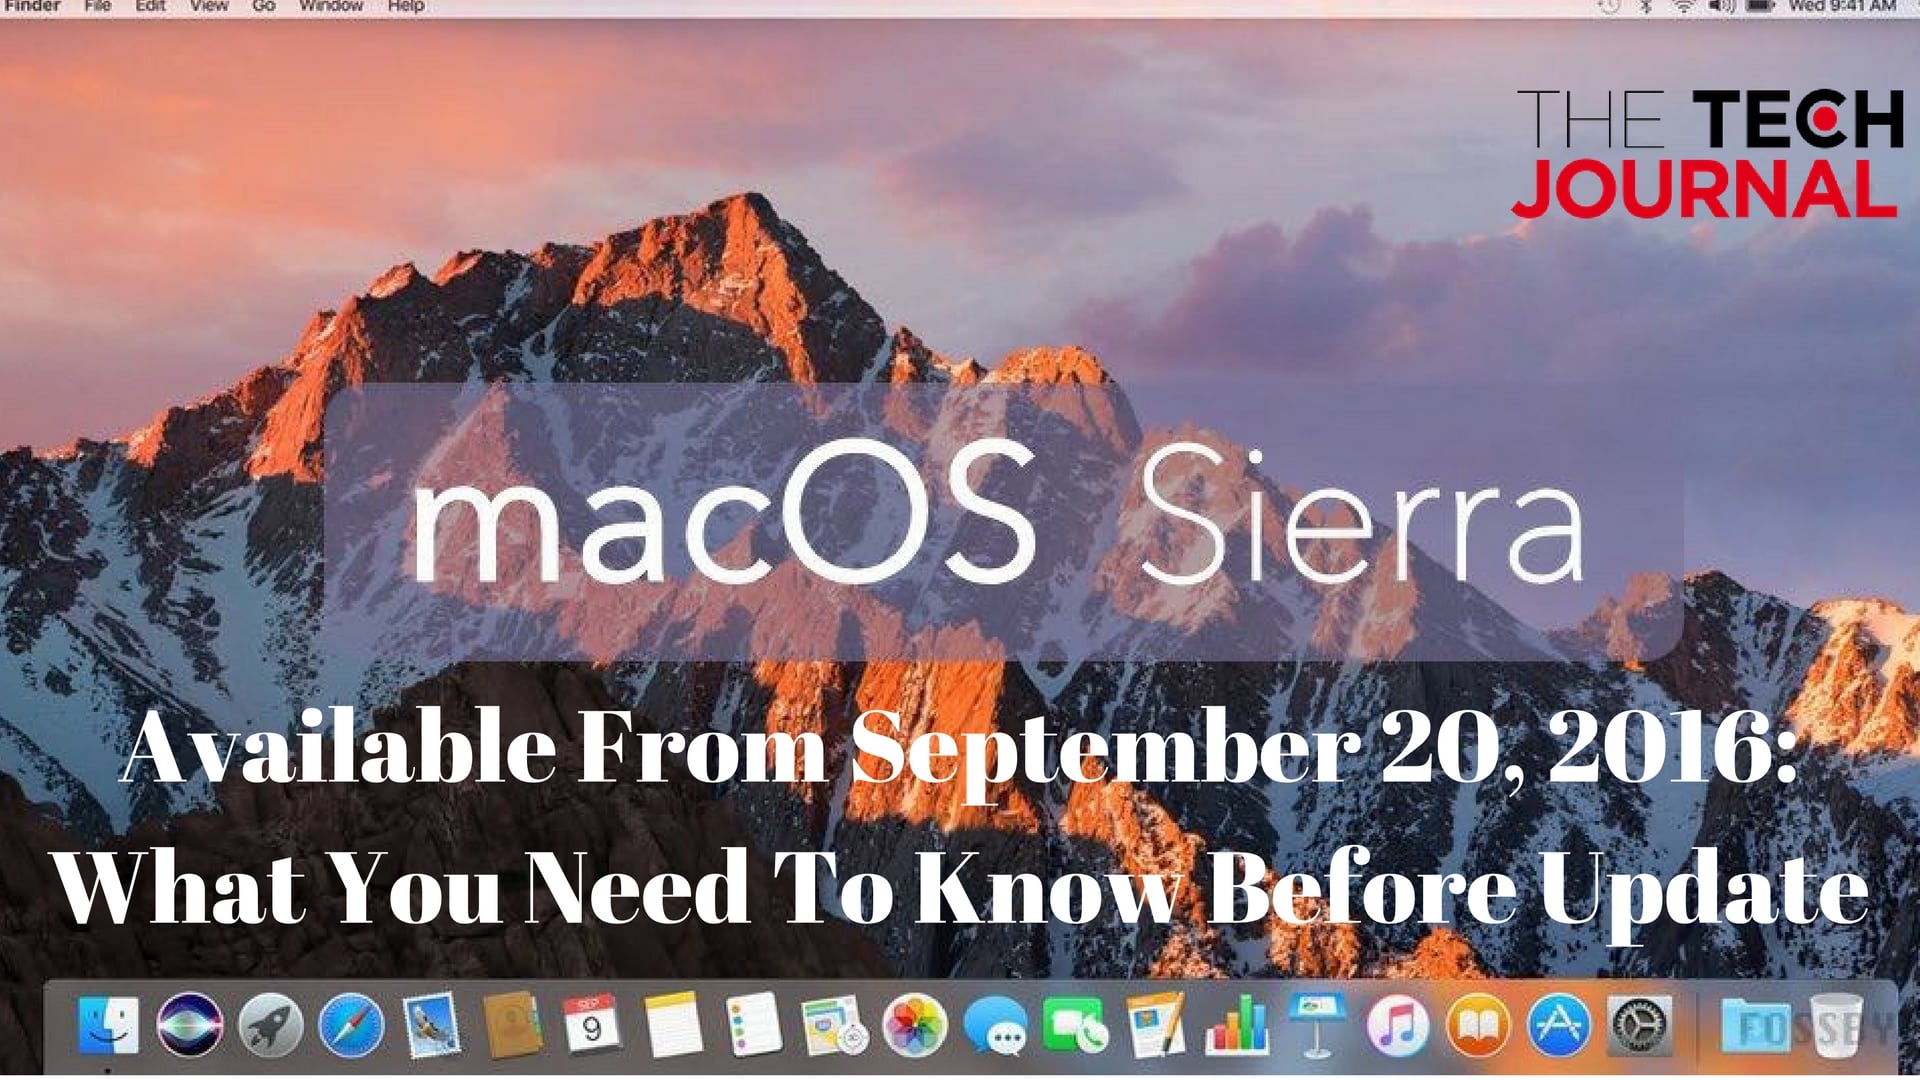 You are currently viewing macOS Sierra: Available From September 20, 2016 & What You Need To Know Before Update